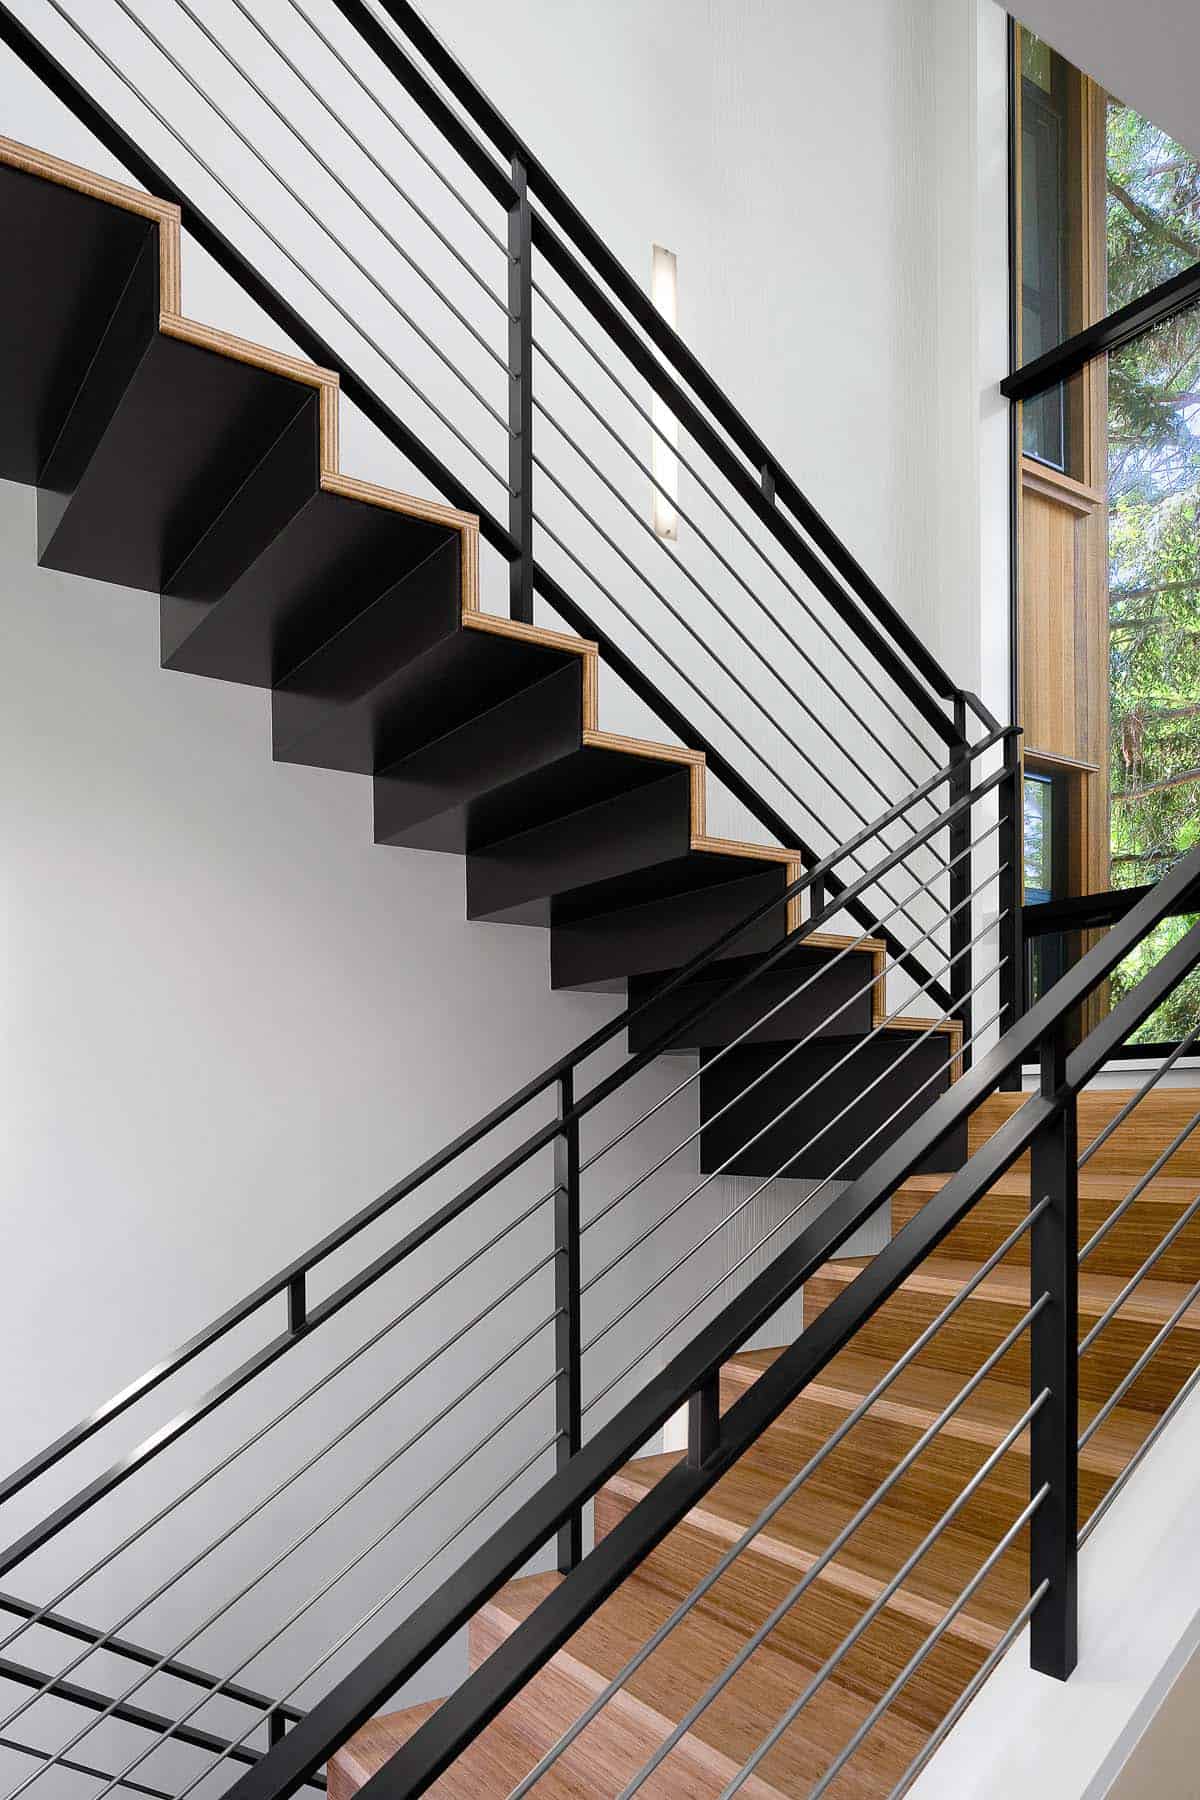 bent steel plate and bamboo stair